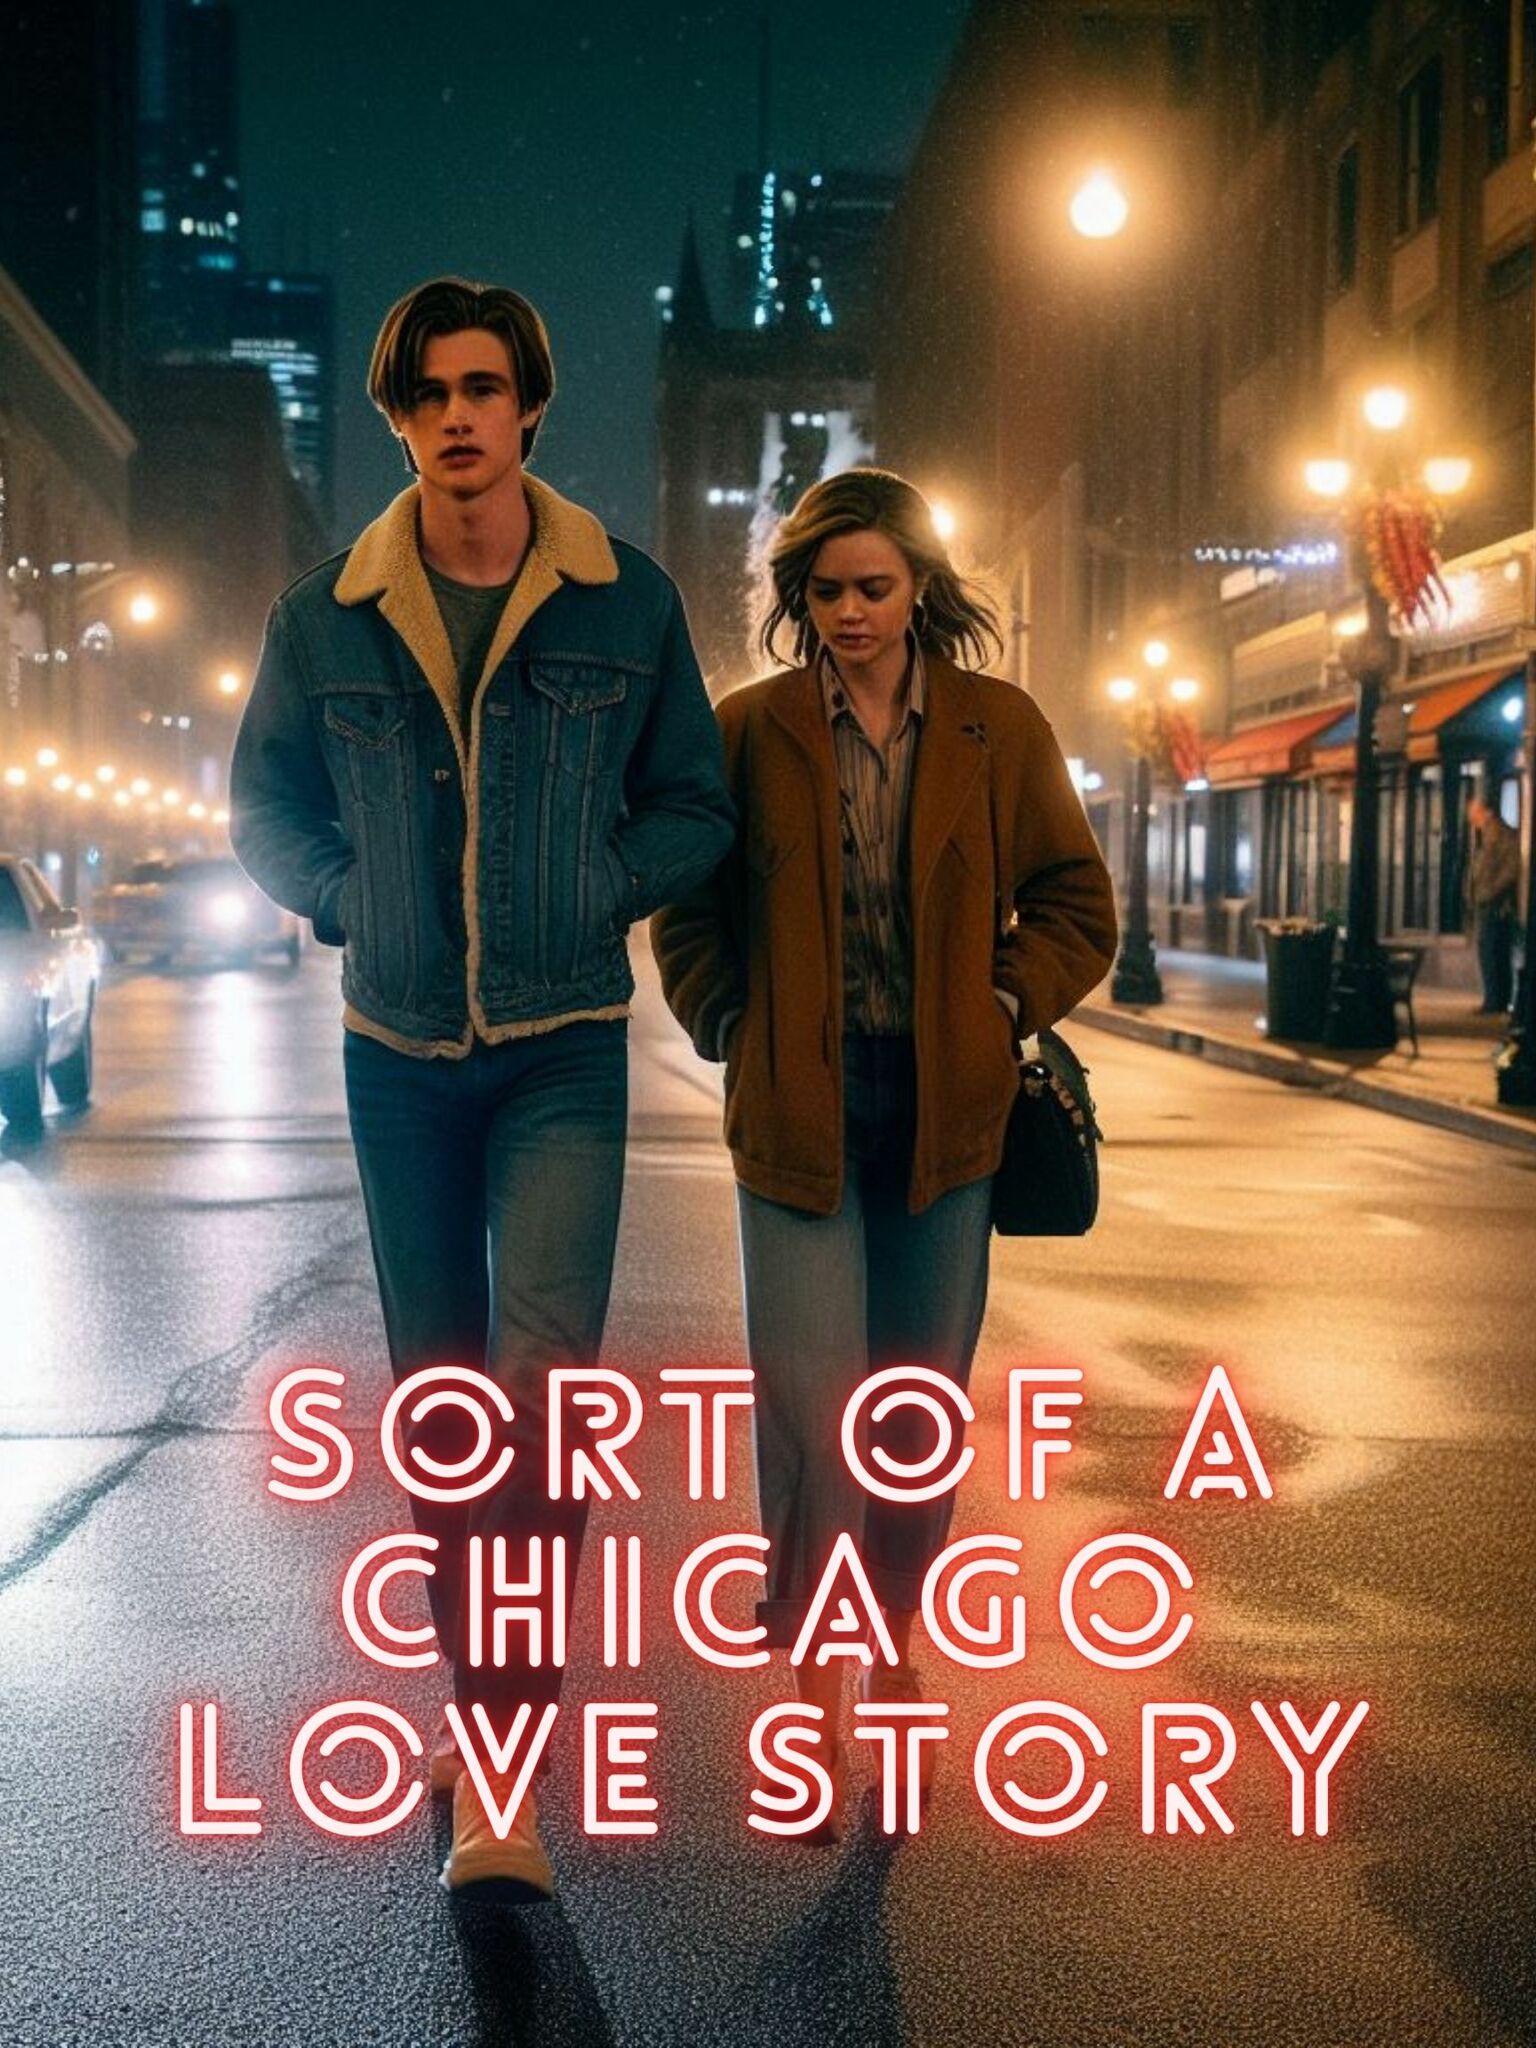 SORT OF A CHICAGO LOVE STORY